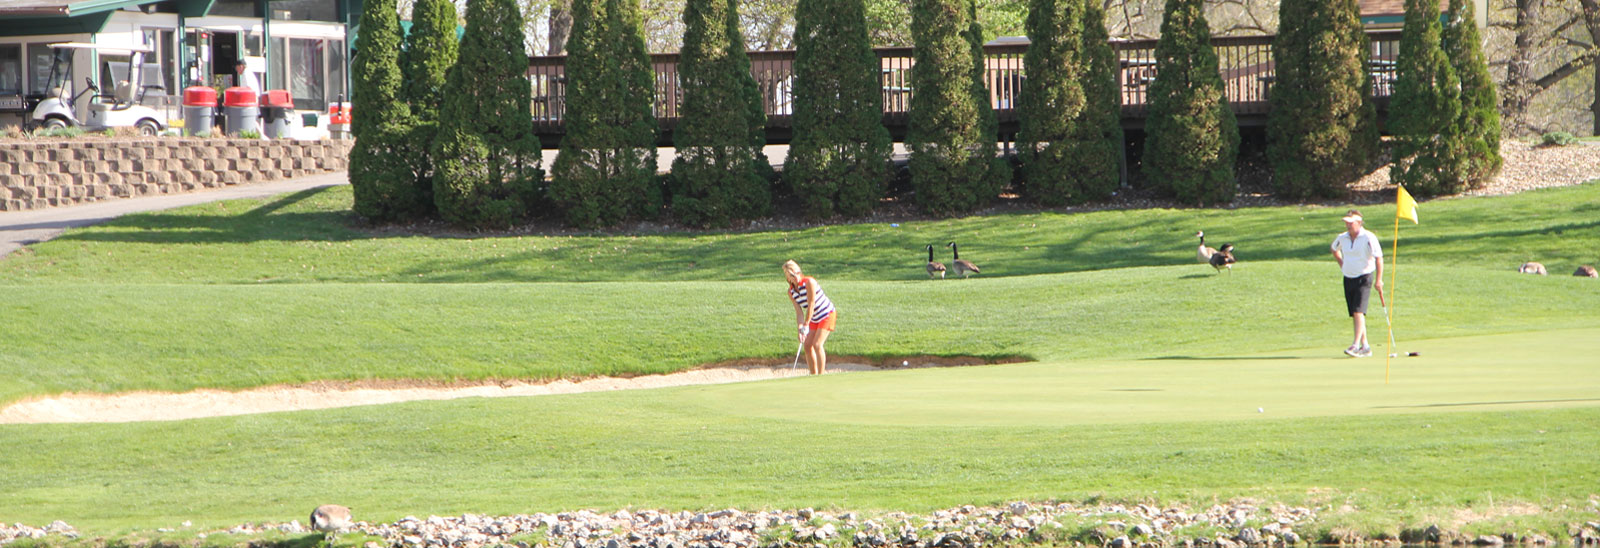 A woman chipping out of a bunker at Ellis while a man stands by the flag on the green